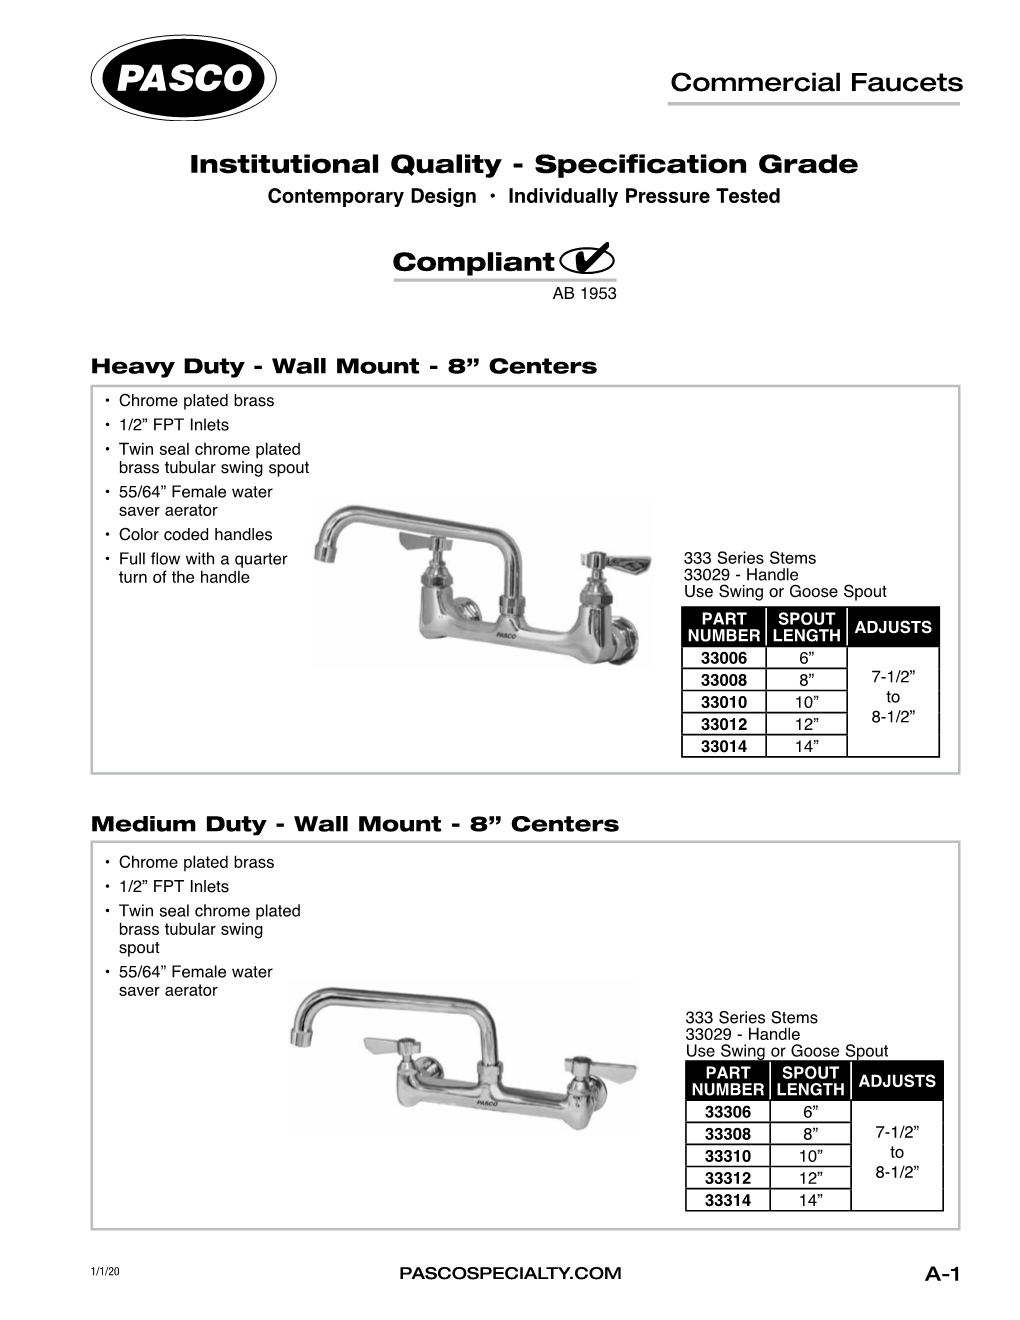 Commercial Faucets Institutional Quality